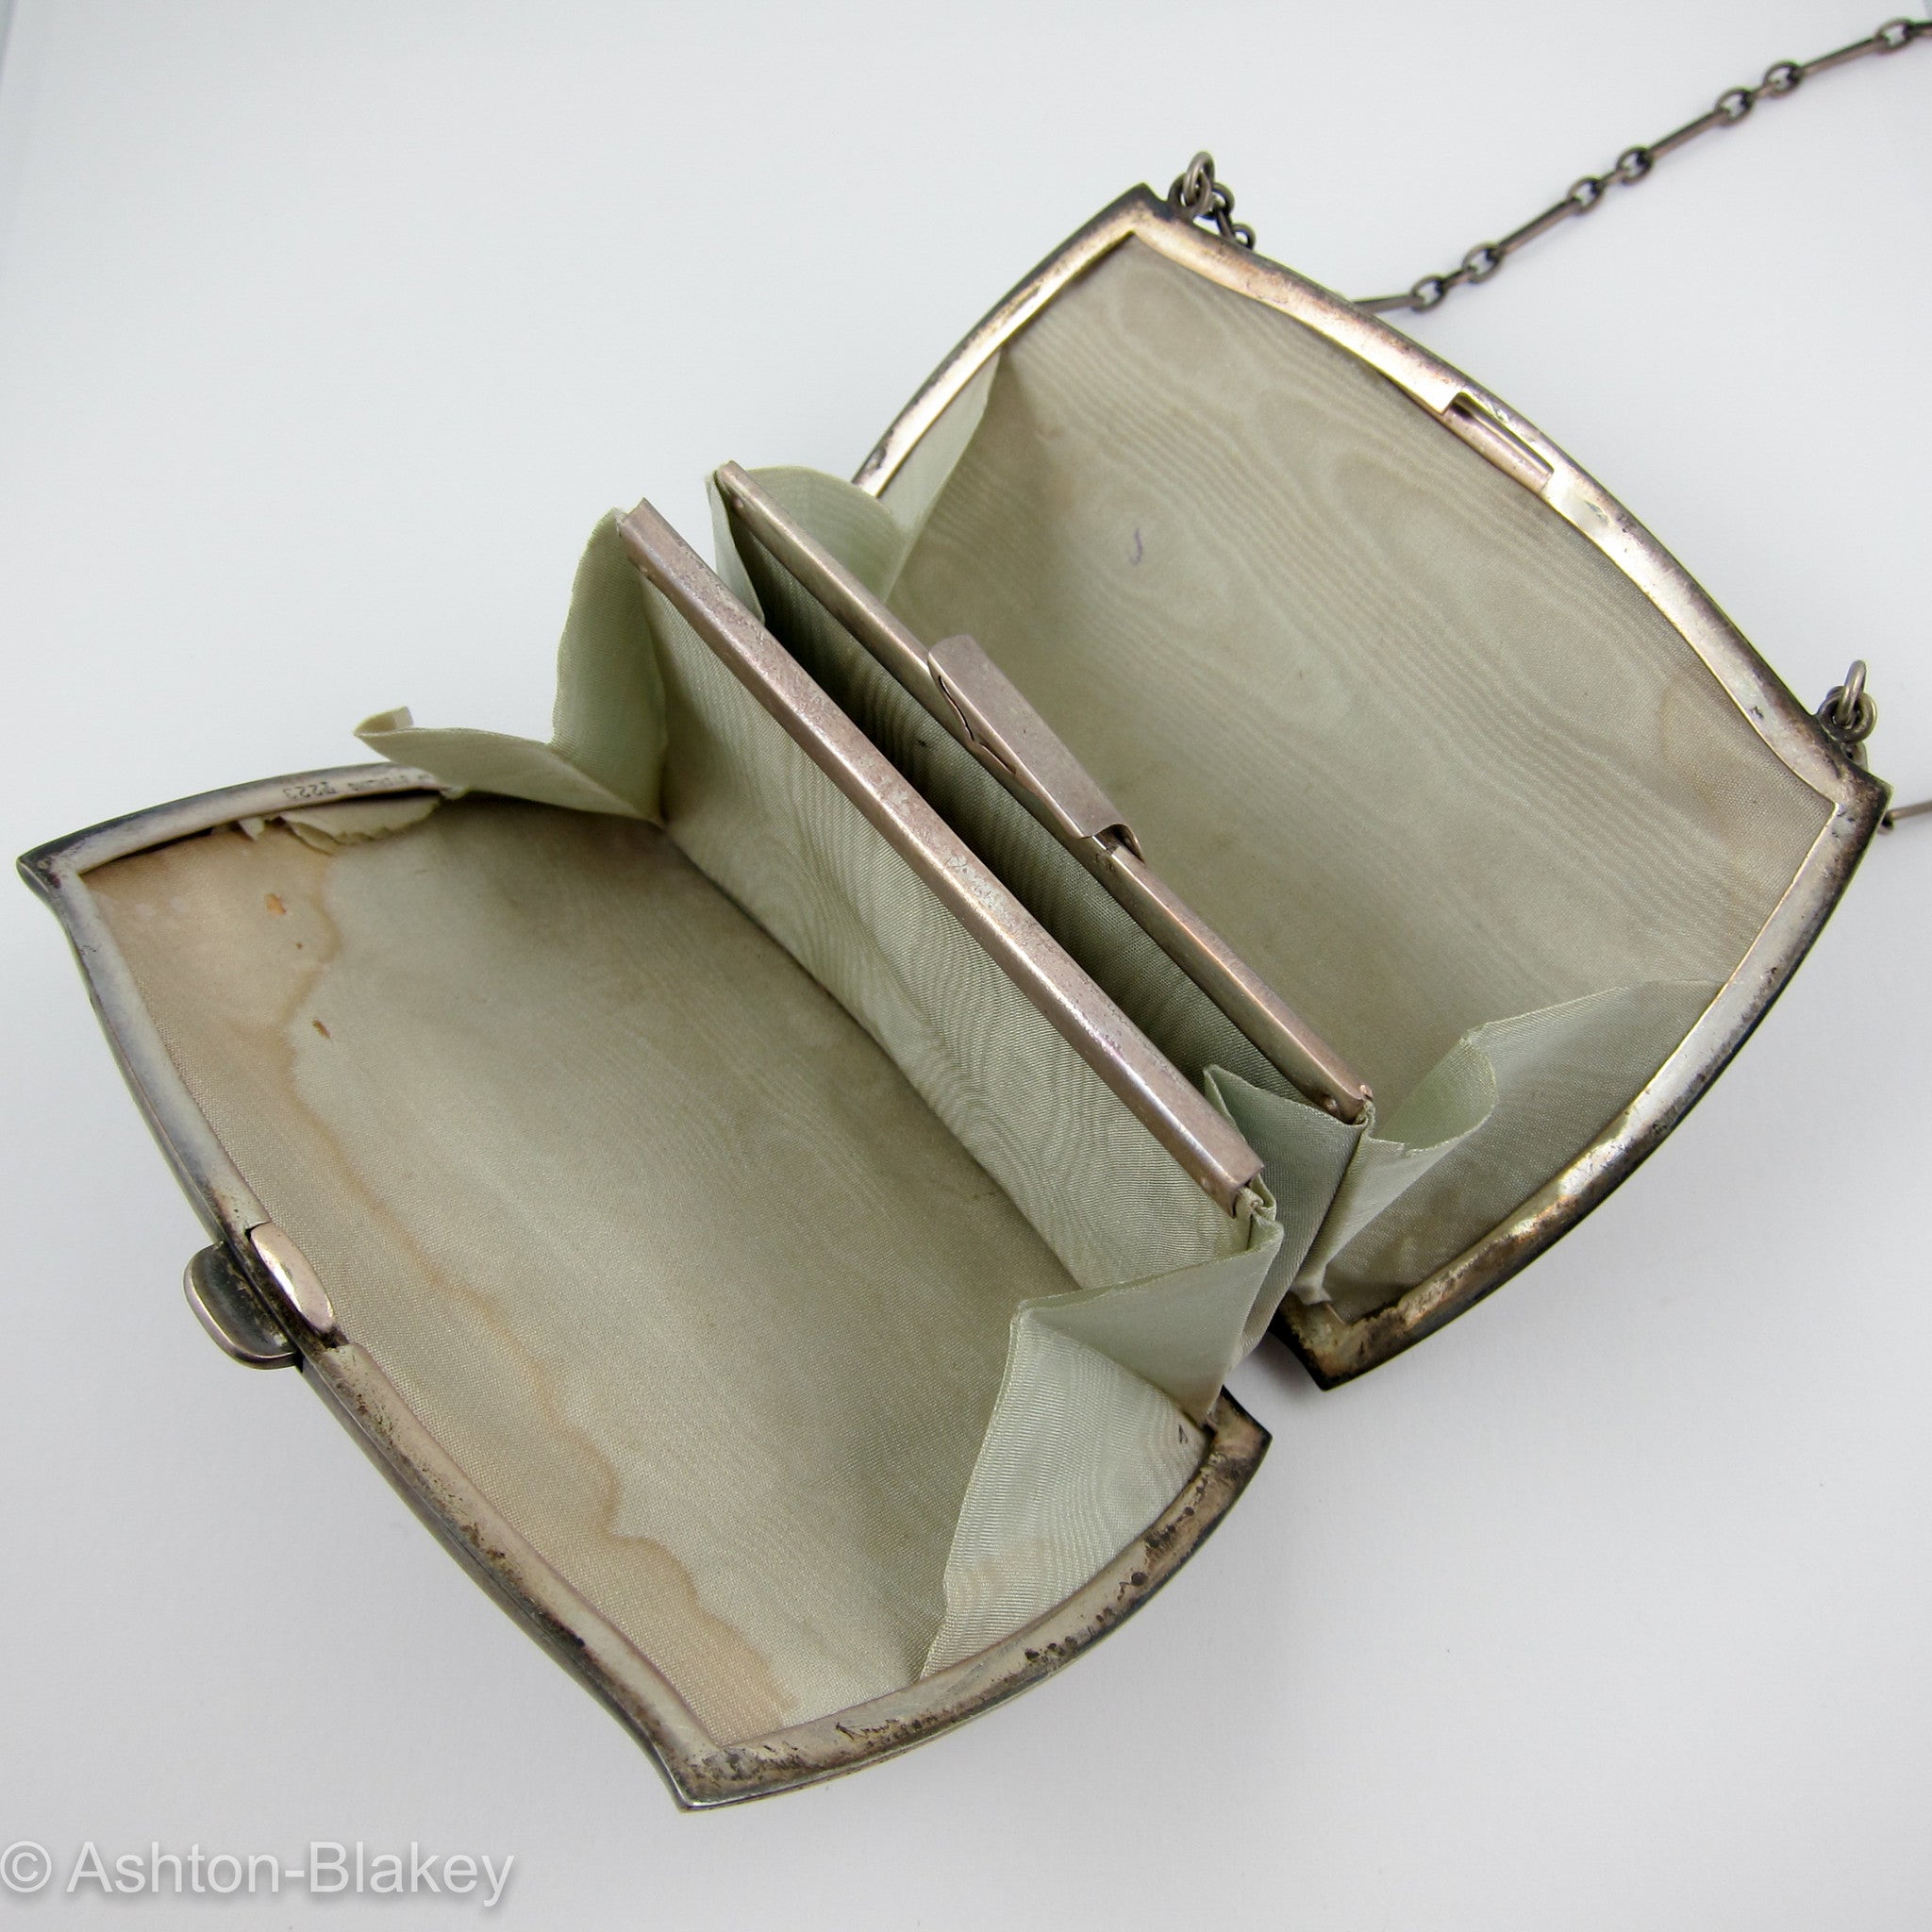 STERLING SILVER evening purse with sterling silver chain - Ashton-Blakey  Vintage Watches